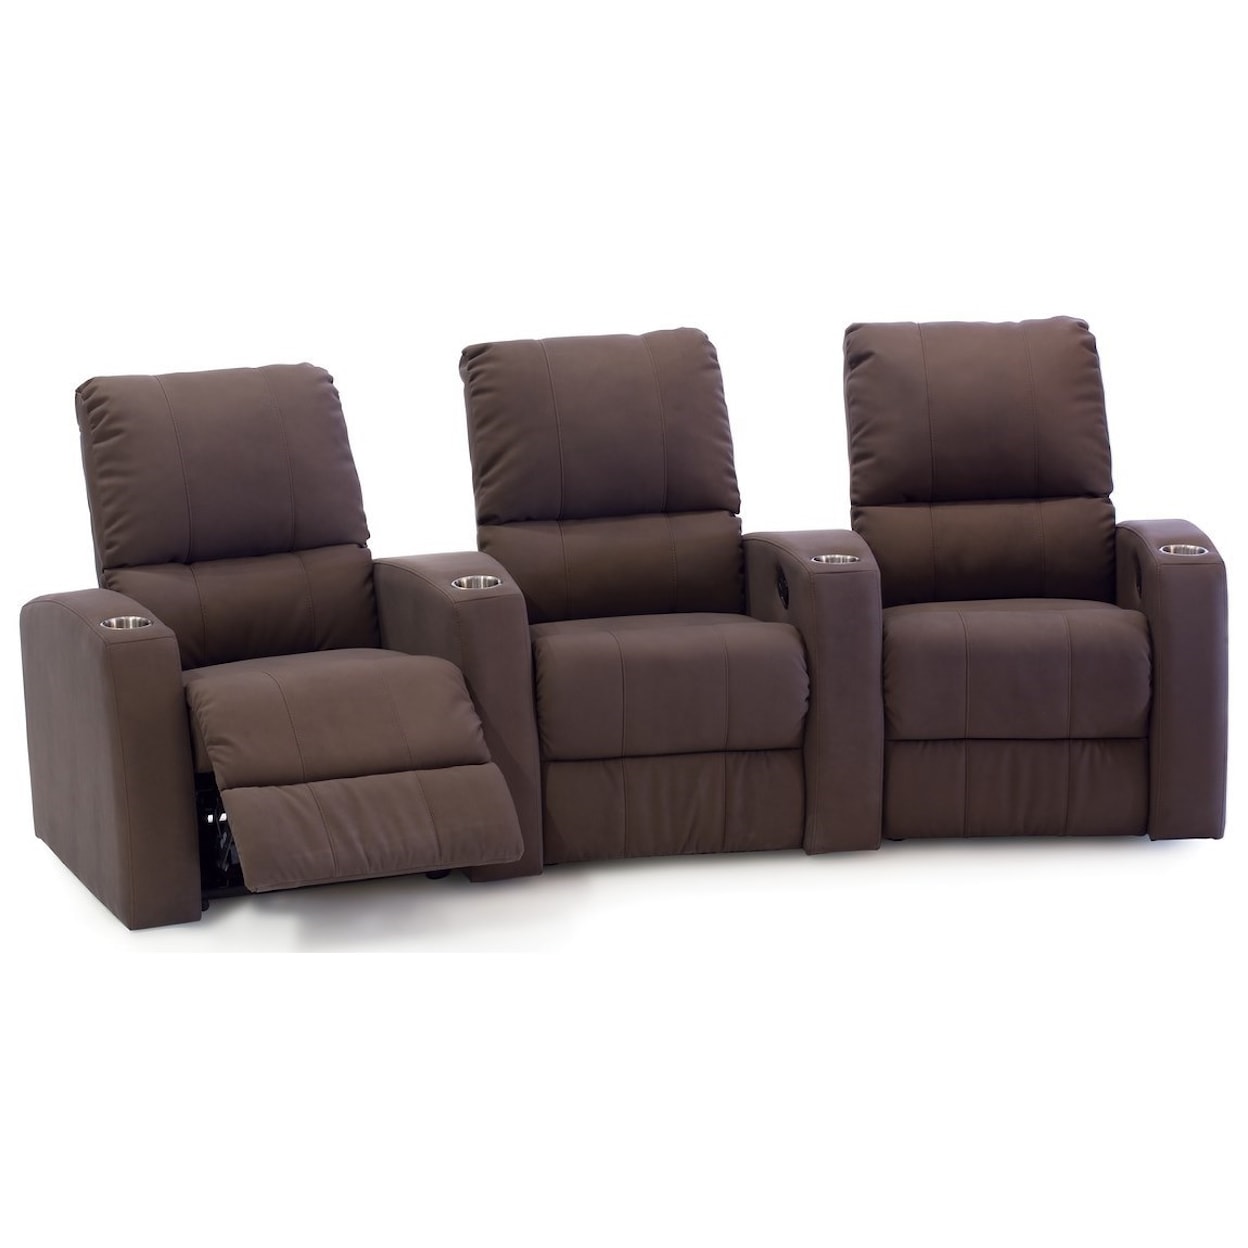 Palliser Pacifico 41920 3-Seat Curved Power Theater Seating